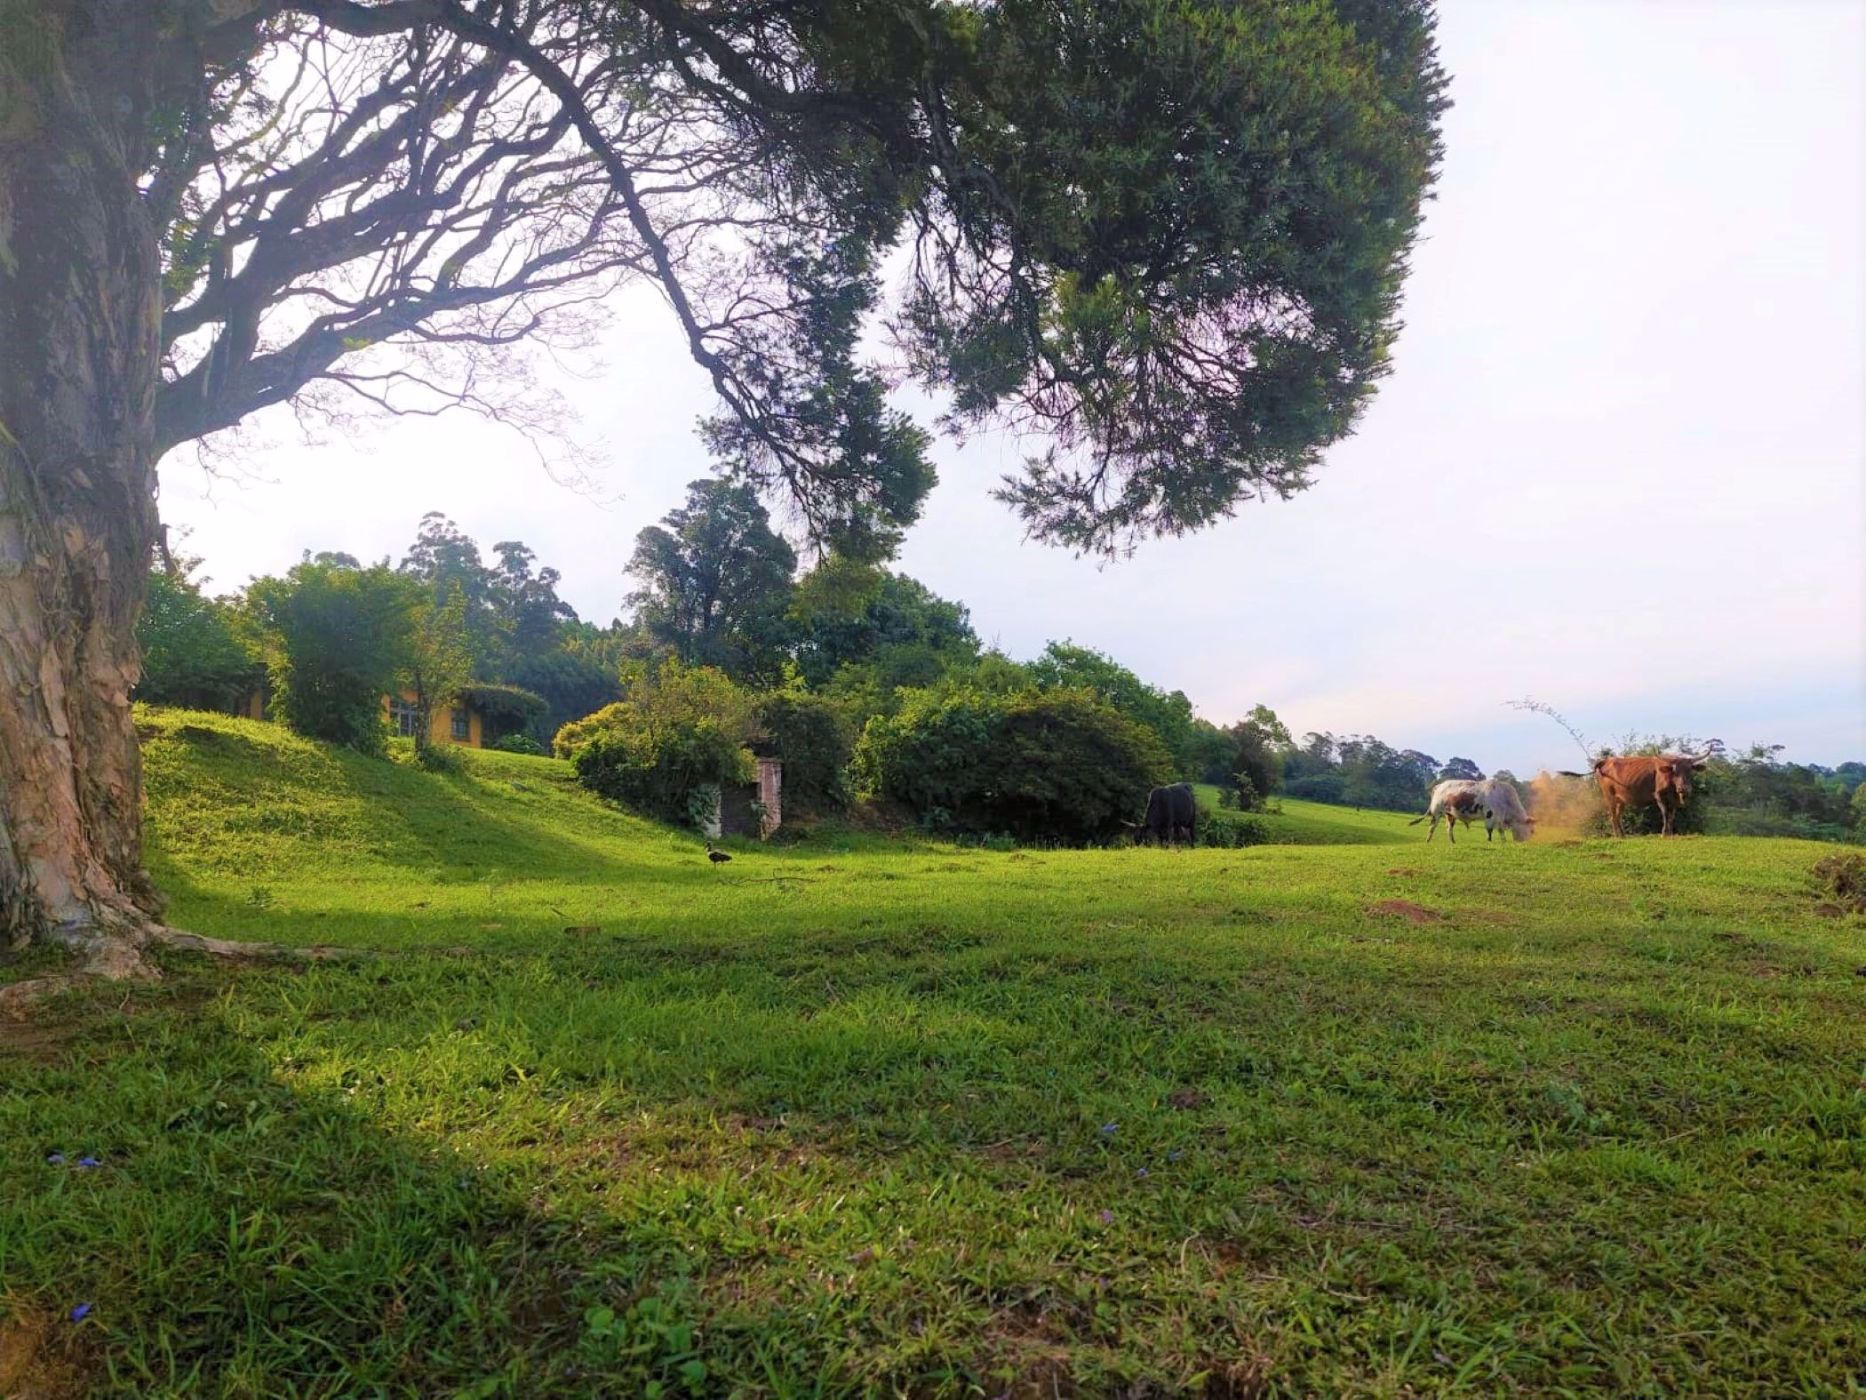 2.88 hectare residential vacant land for sale in Worlds View (Hilton)